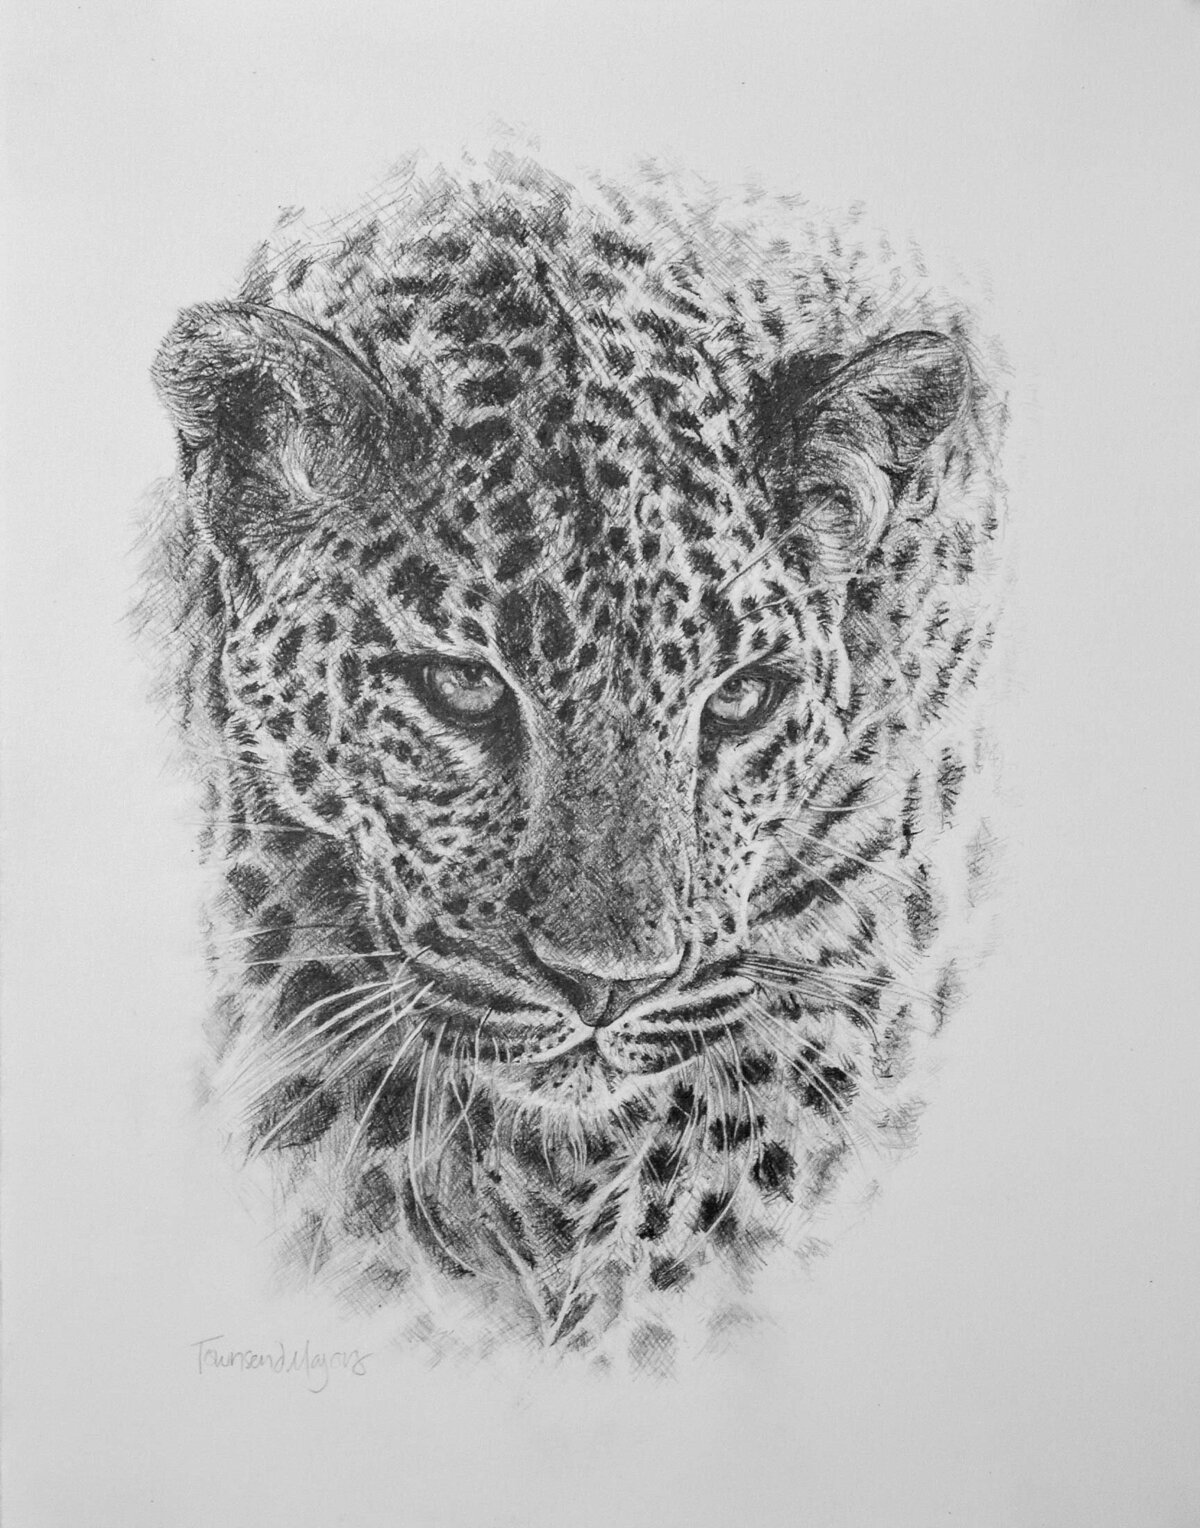 Townsend Majors'  graphite drawing of a leopard